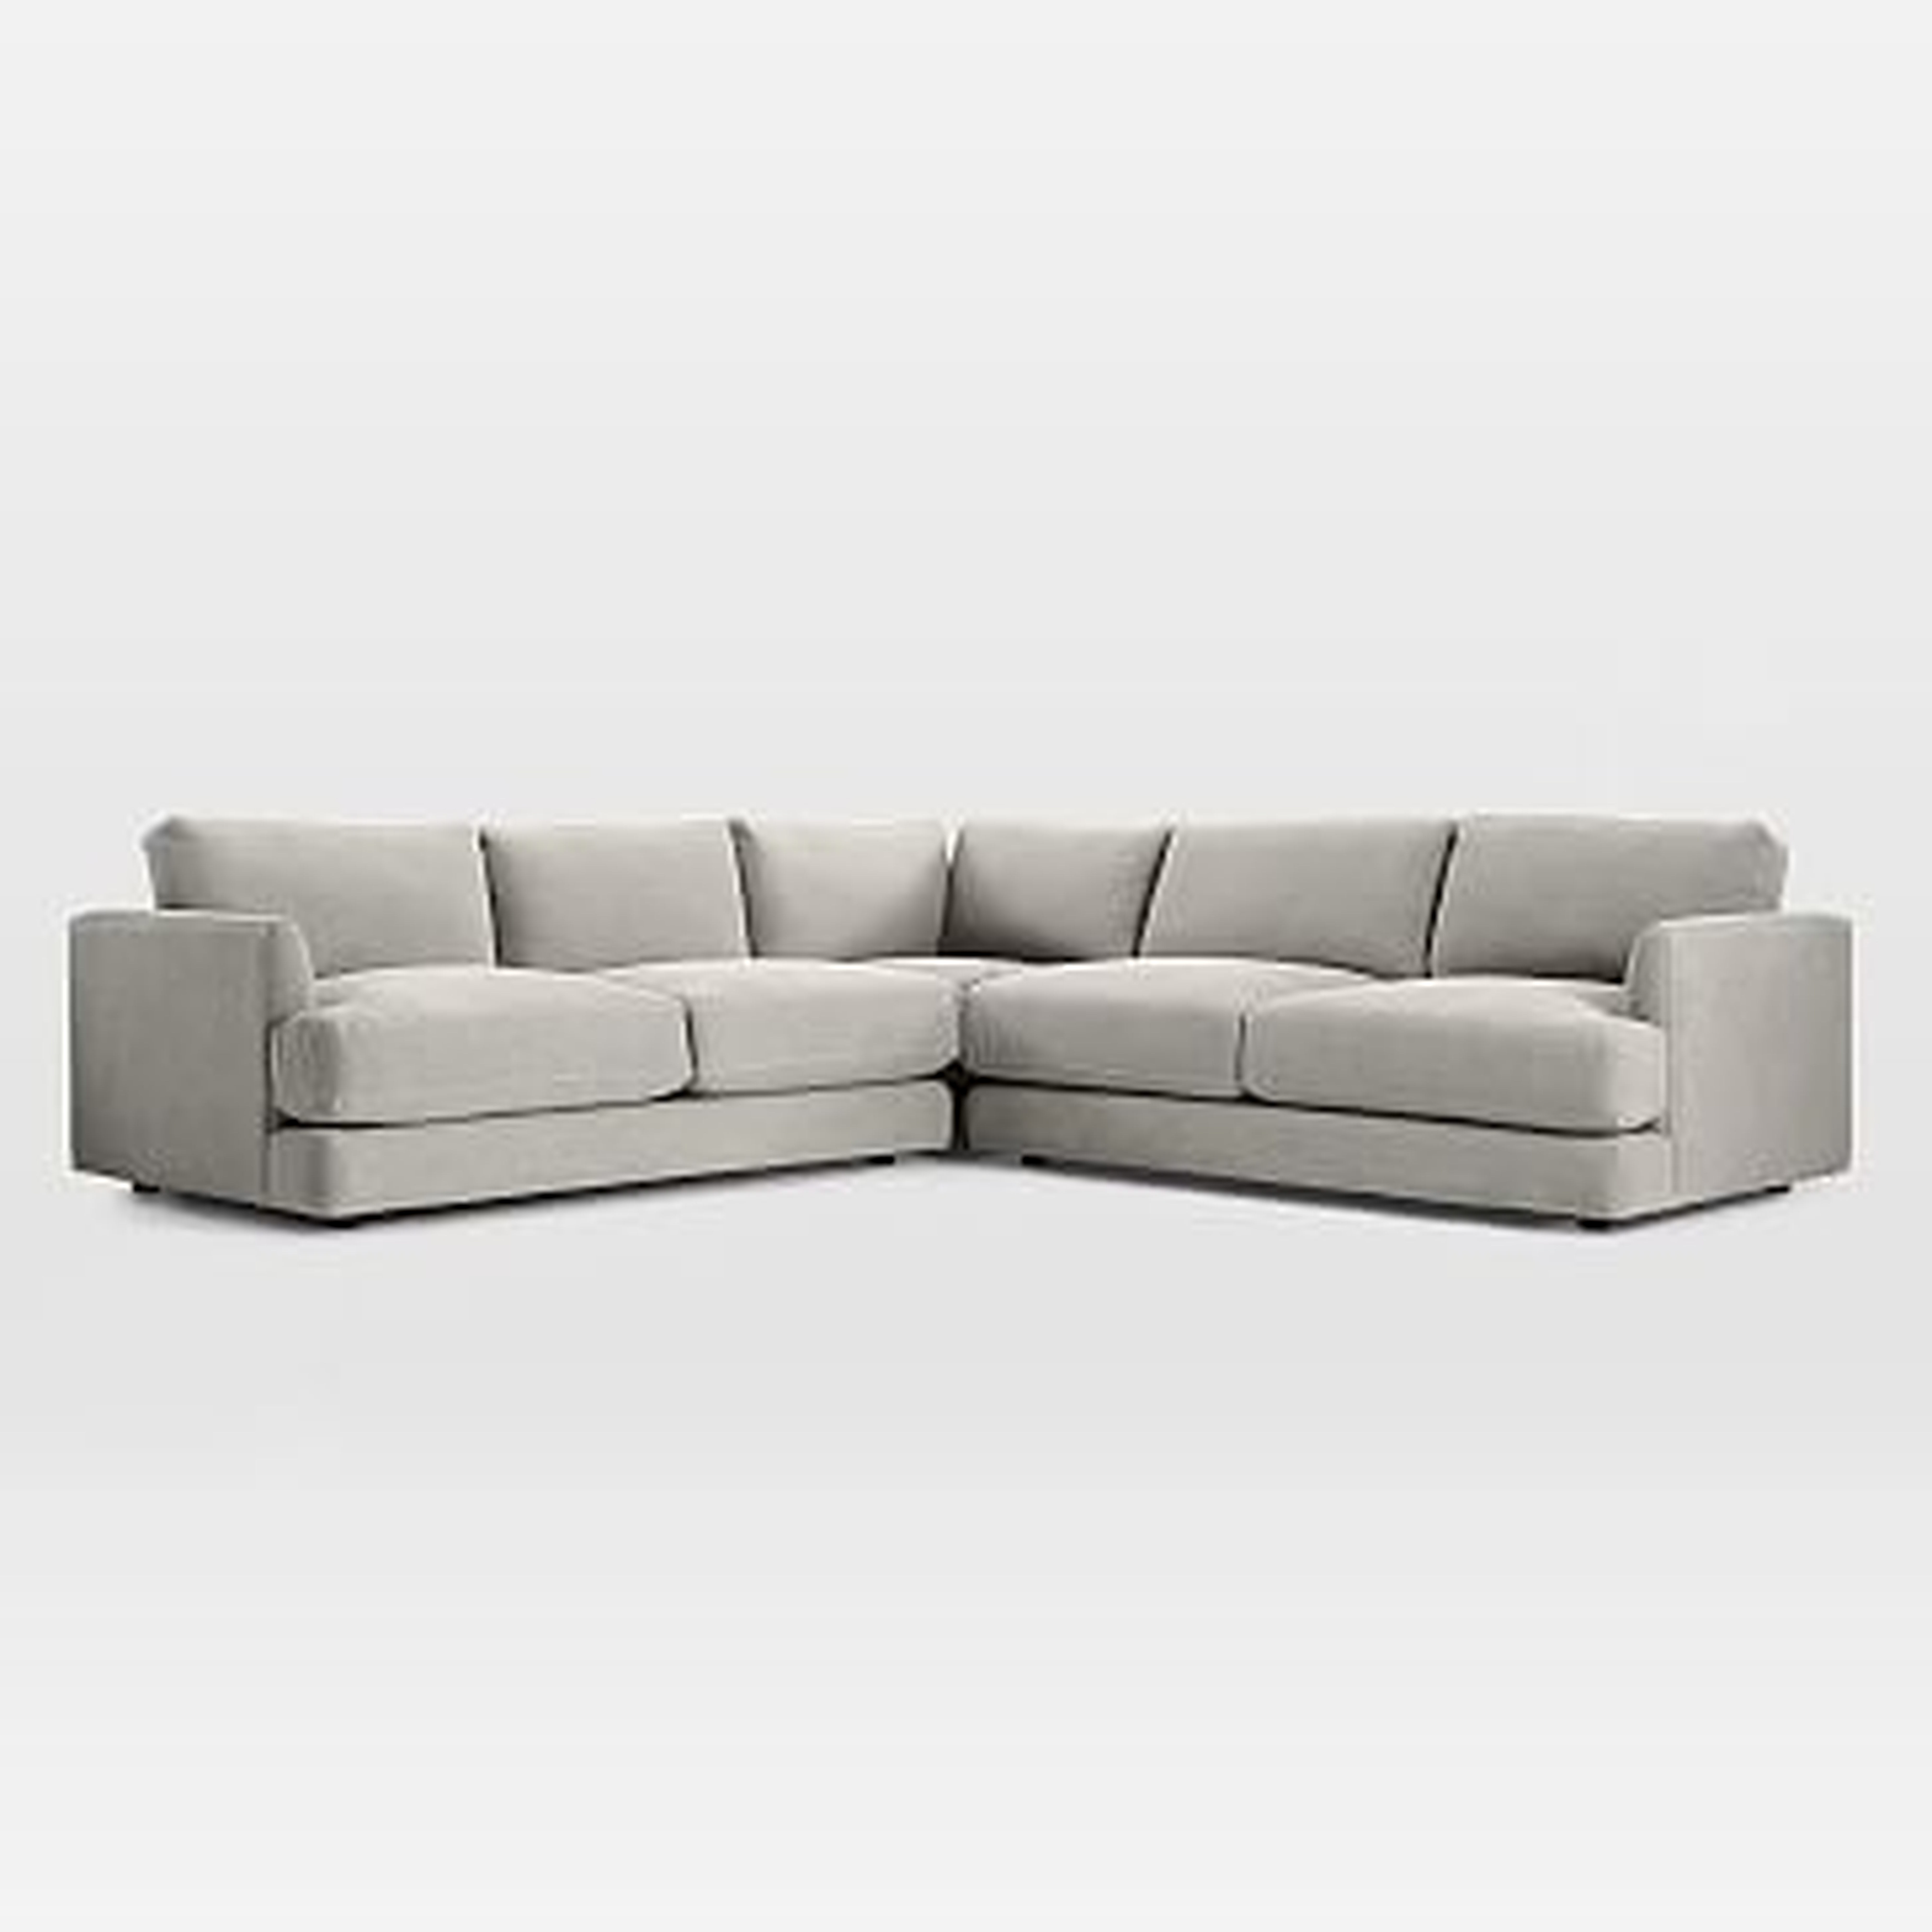 Haven Sectional Set 03: Left Arm Sofa, Corner, Right Arm Sofa, Poly, Heathered Crosshatch, Natural - West Elm